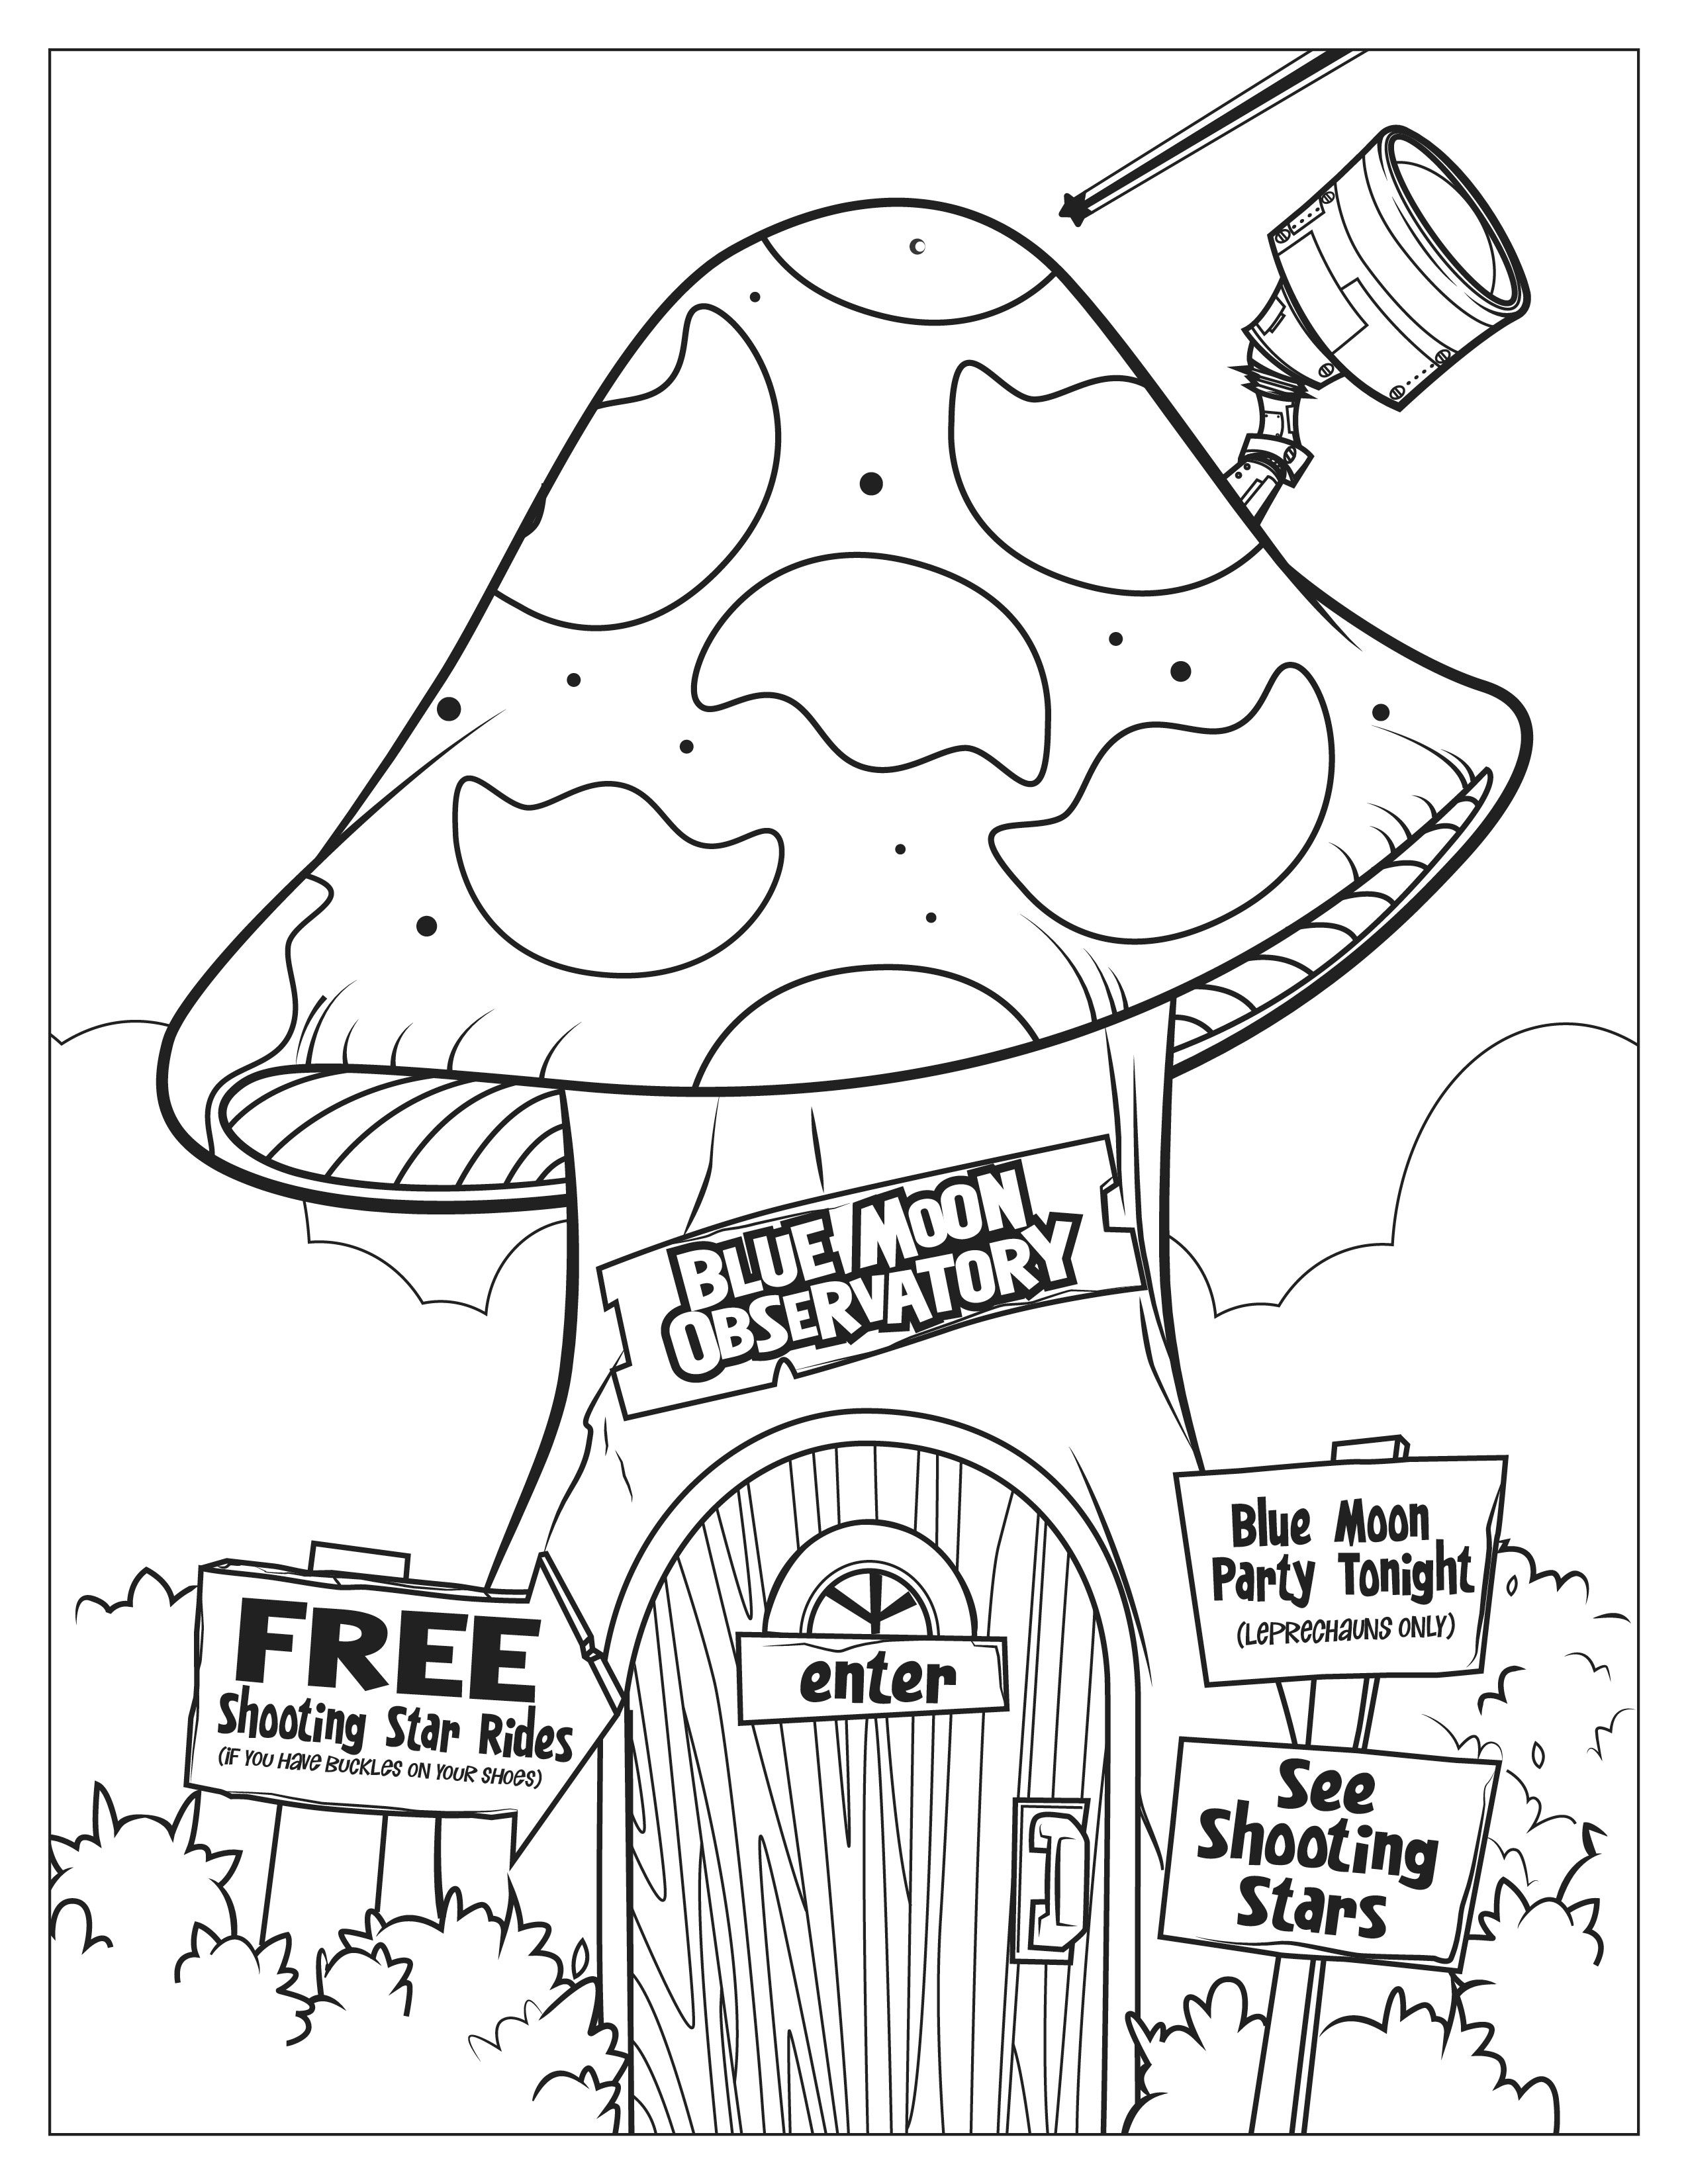 Lucky charms blue moon observatory coloring page coloring pages heart for kids disney crafts